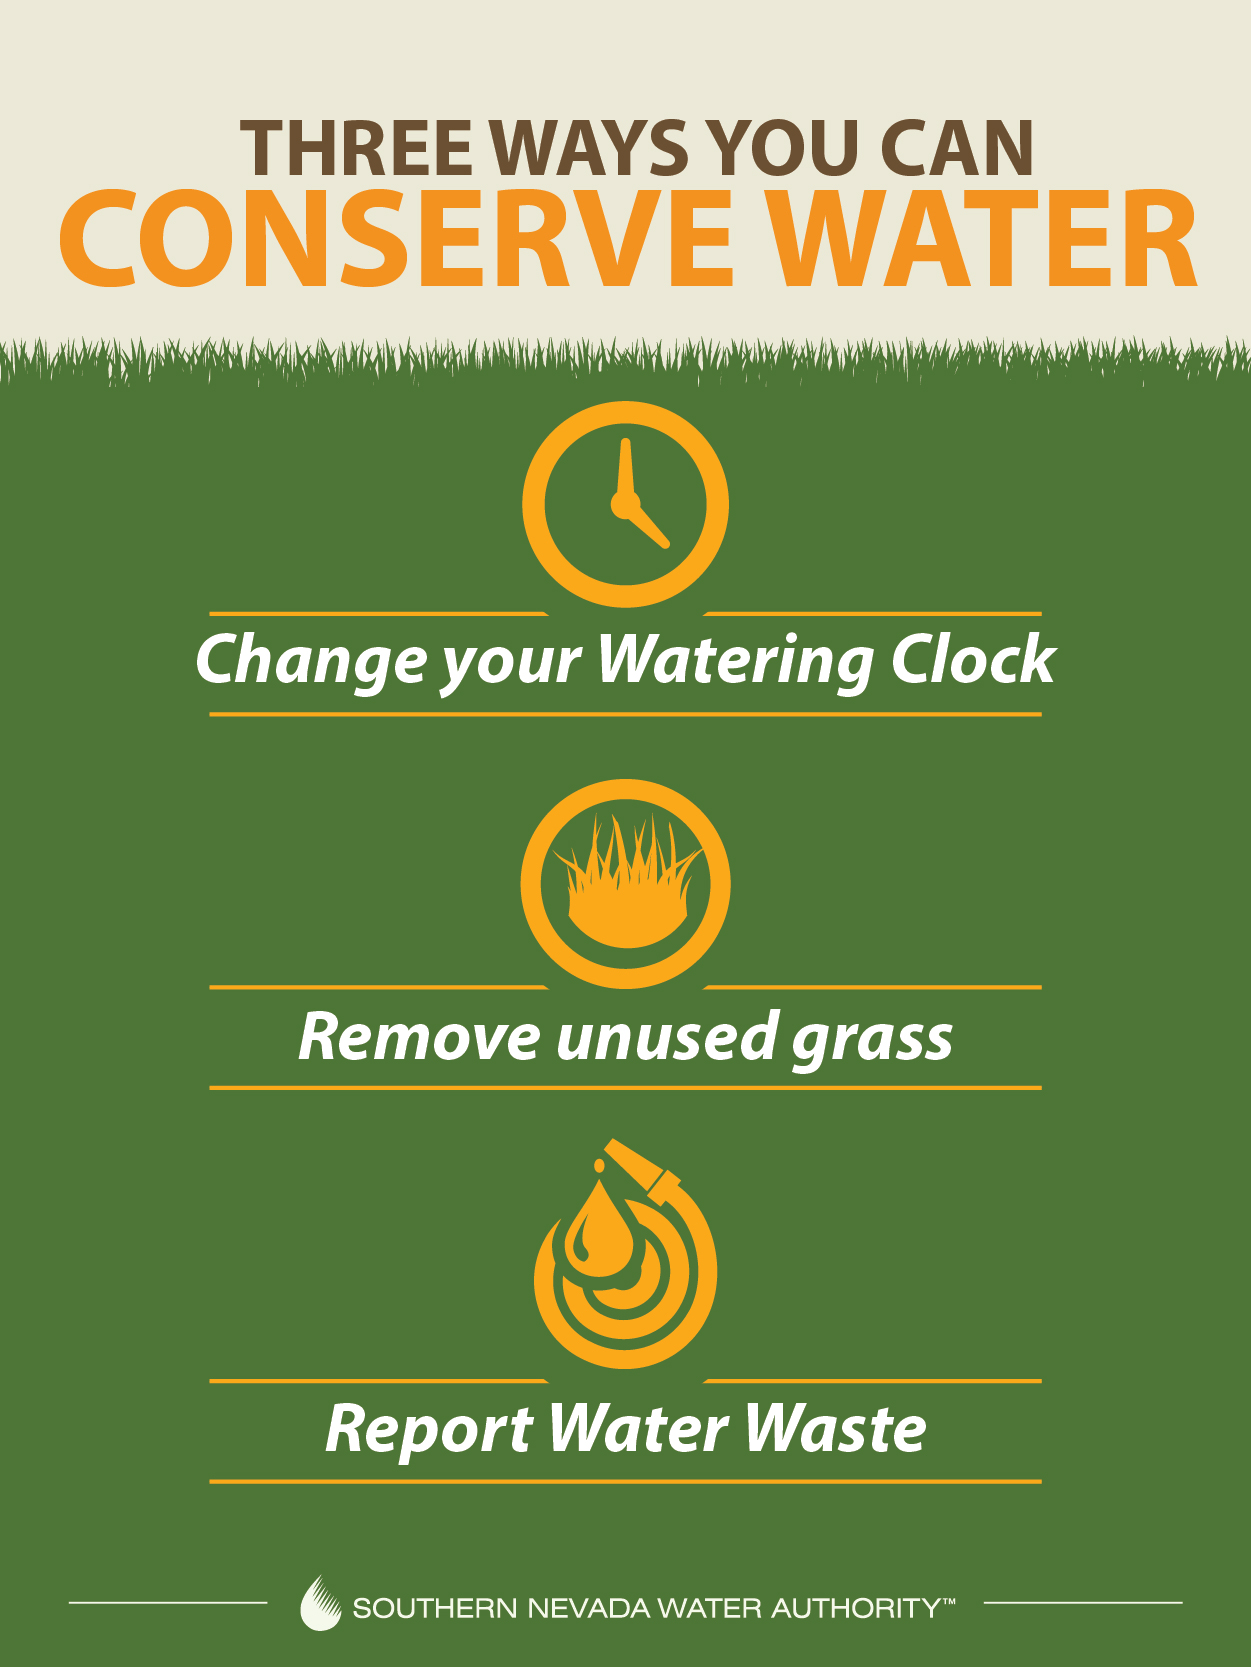 A graphic directing readers to conserve water by changing their clock, removing unused grass, and reporting water waste